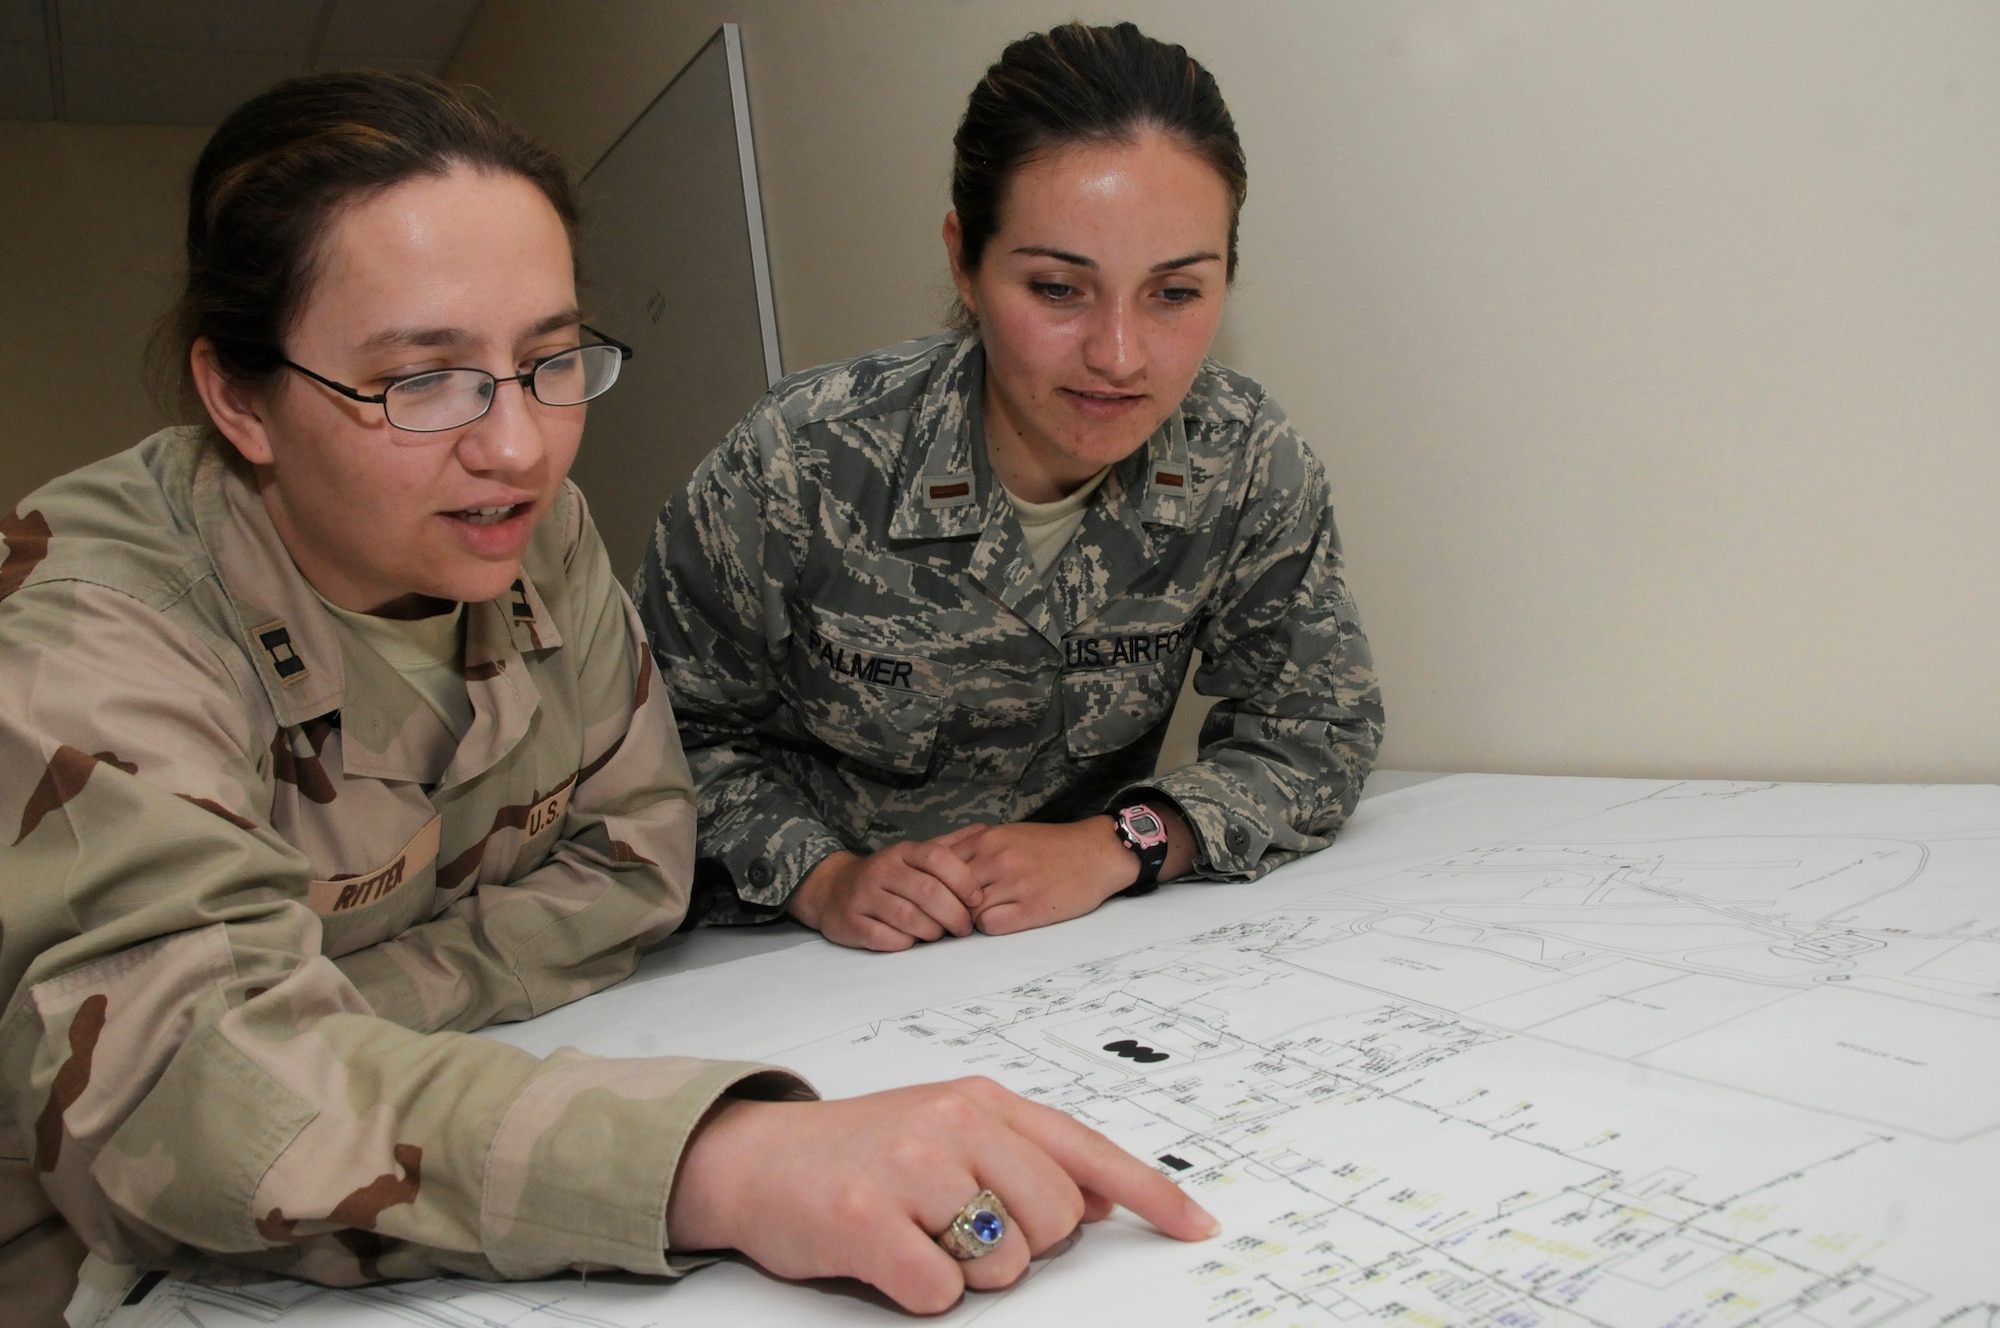 Capt. Kalli Ritter shows her replacement, 2nd Lt. Alyssa Palmer, future expansion plans at an undisclosed air base in Southwest Asia Sept. 7, 2008. Both officers are project managers for the 379th Expeditionary Communications Squadron. Project managers here are directly involved in turning the base from expeditionary to an enduring base in support of Operations Iraqi and Enduring Freedom and Joint Task Force-Horn of Africa. Captain Ritter, a native of Howell, Mich., is deployed from Lajes Field, Portugal, and Lieutenant Palmer, a native of Corvallis, Ore., is deployed from Tinker Air Force Base, Okla.  (U.S. Air Force photo by Staff Sgt. Darnell T. Cannady/Released)